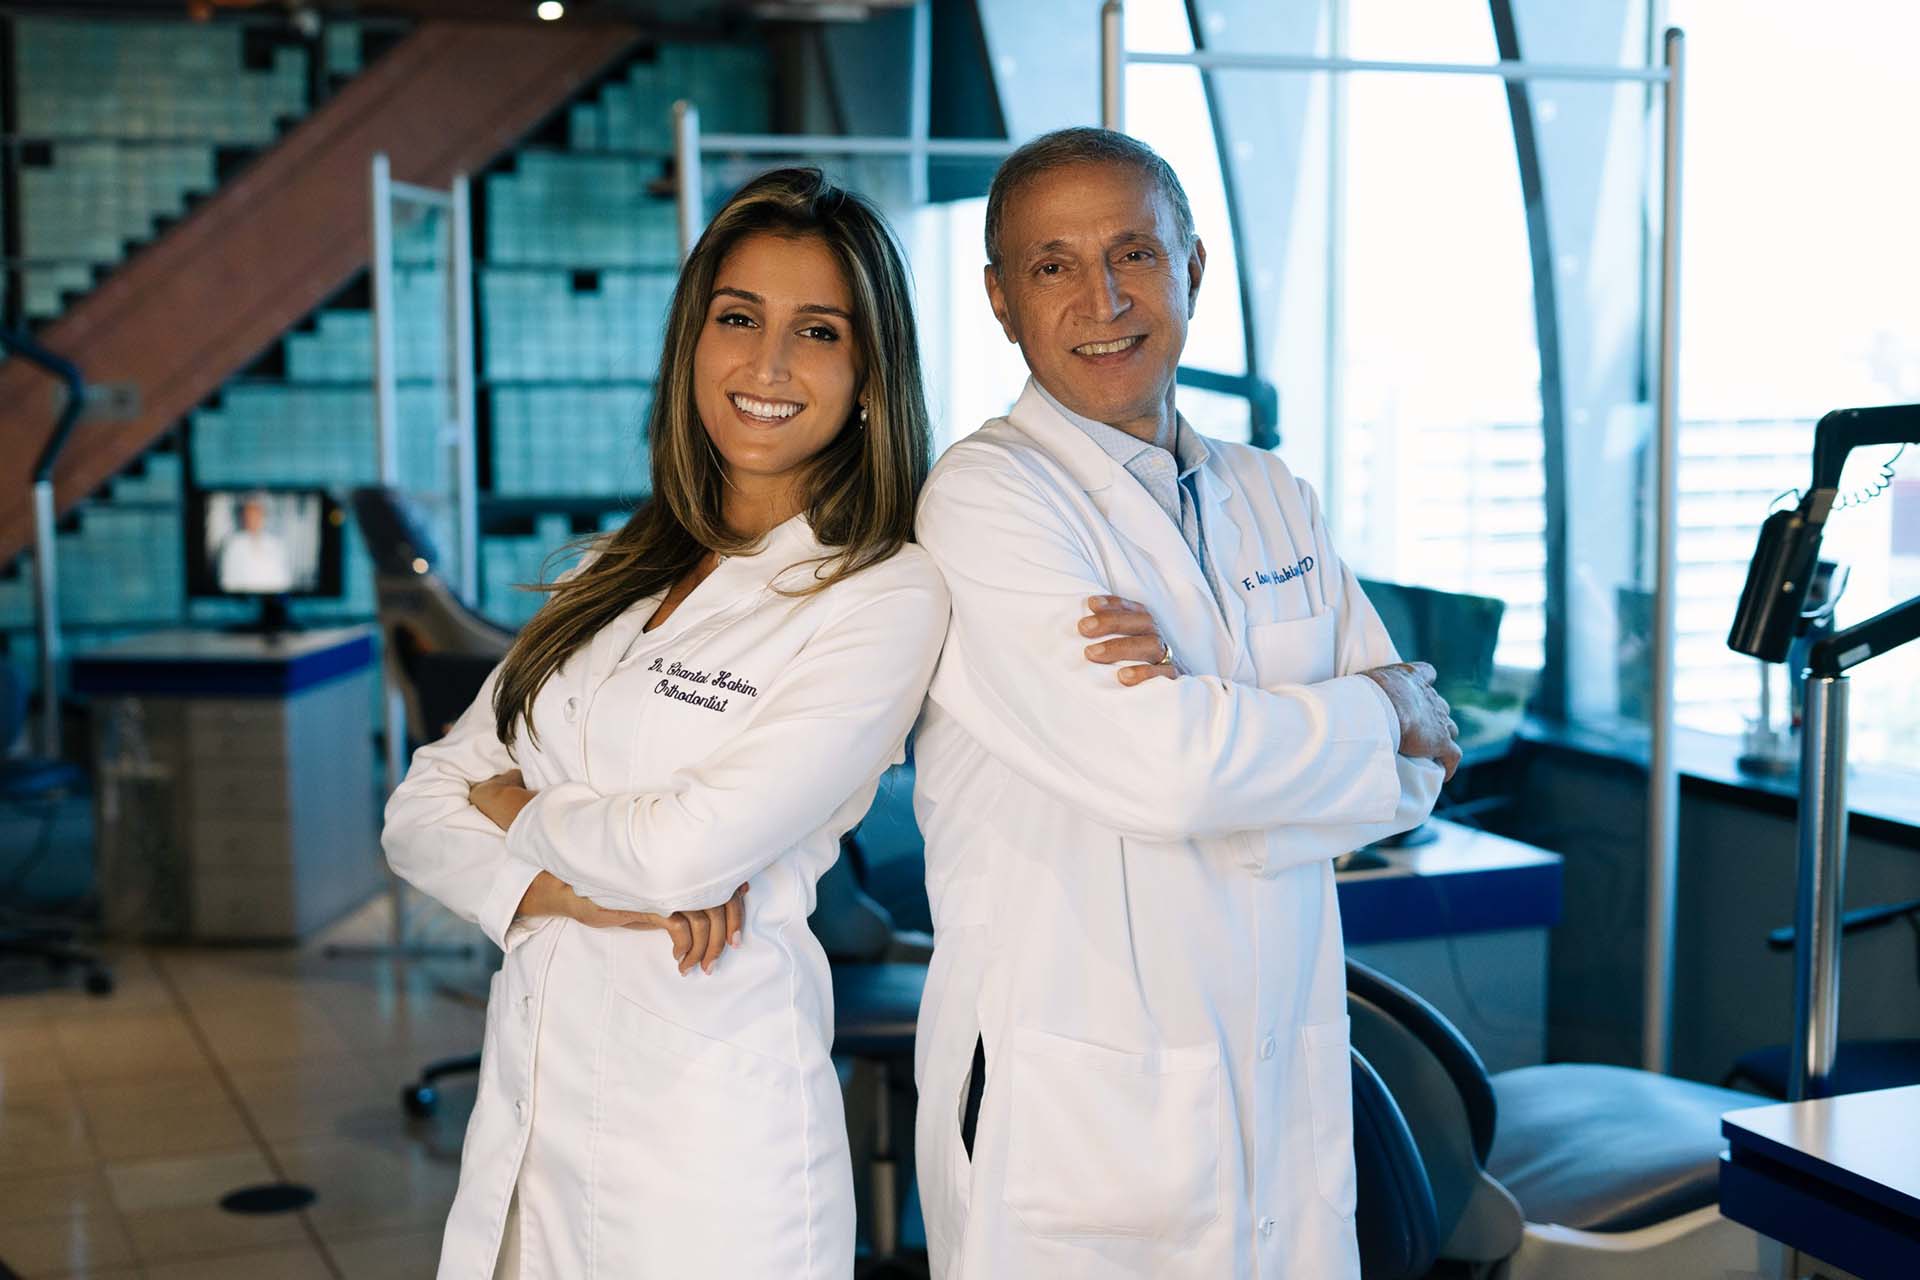 Dr. Chantal Hakim and Dr. F. Isaac Hakim at the Orthospaceship in Los Angeles, a Southern California orthodontic practice serving Beverly Crest, Los Angeles.